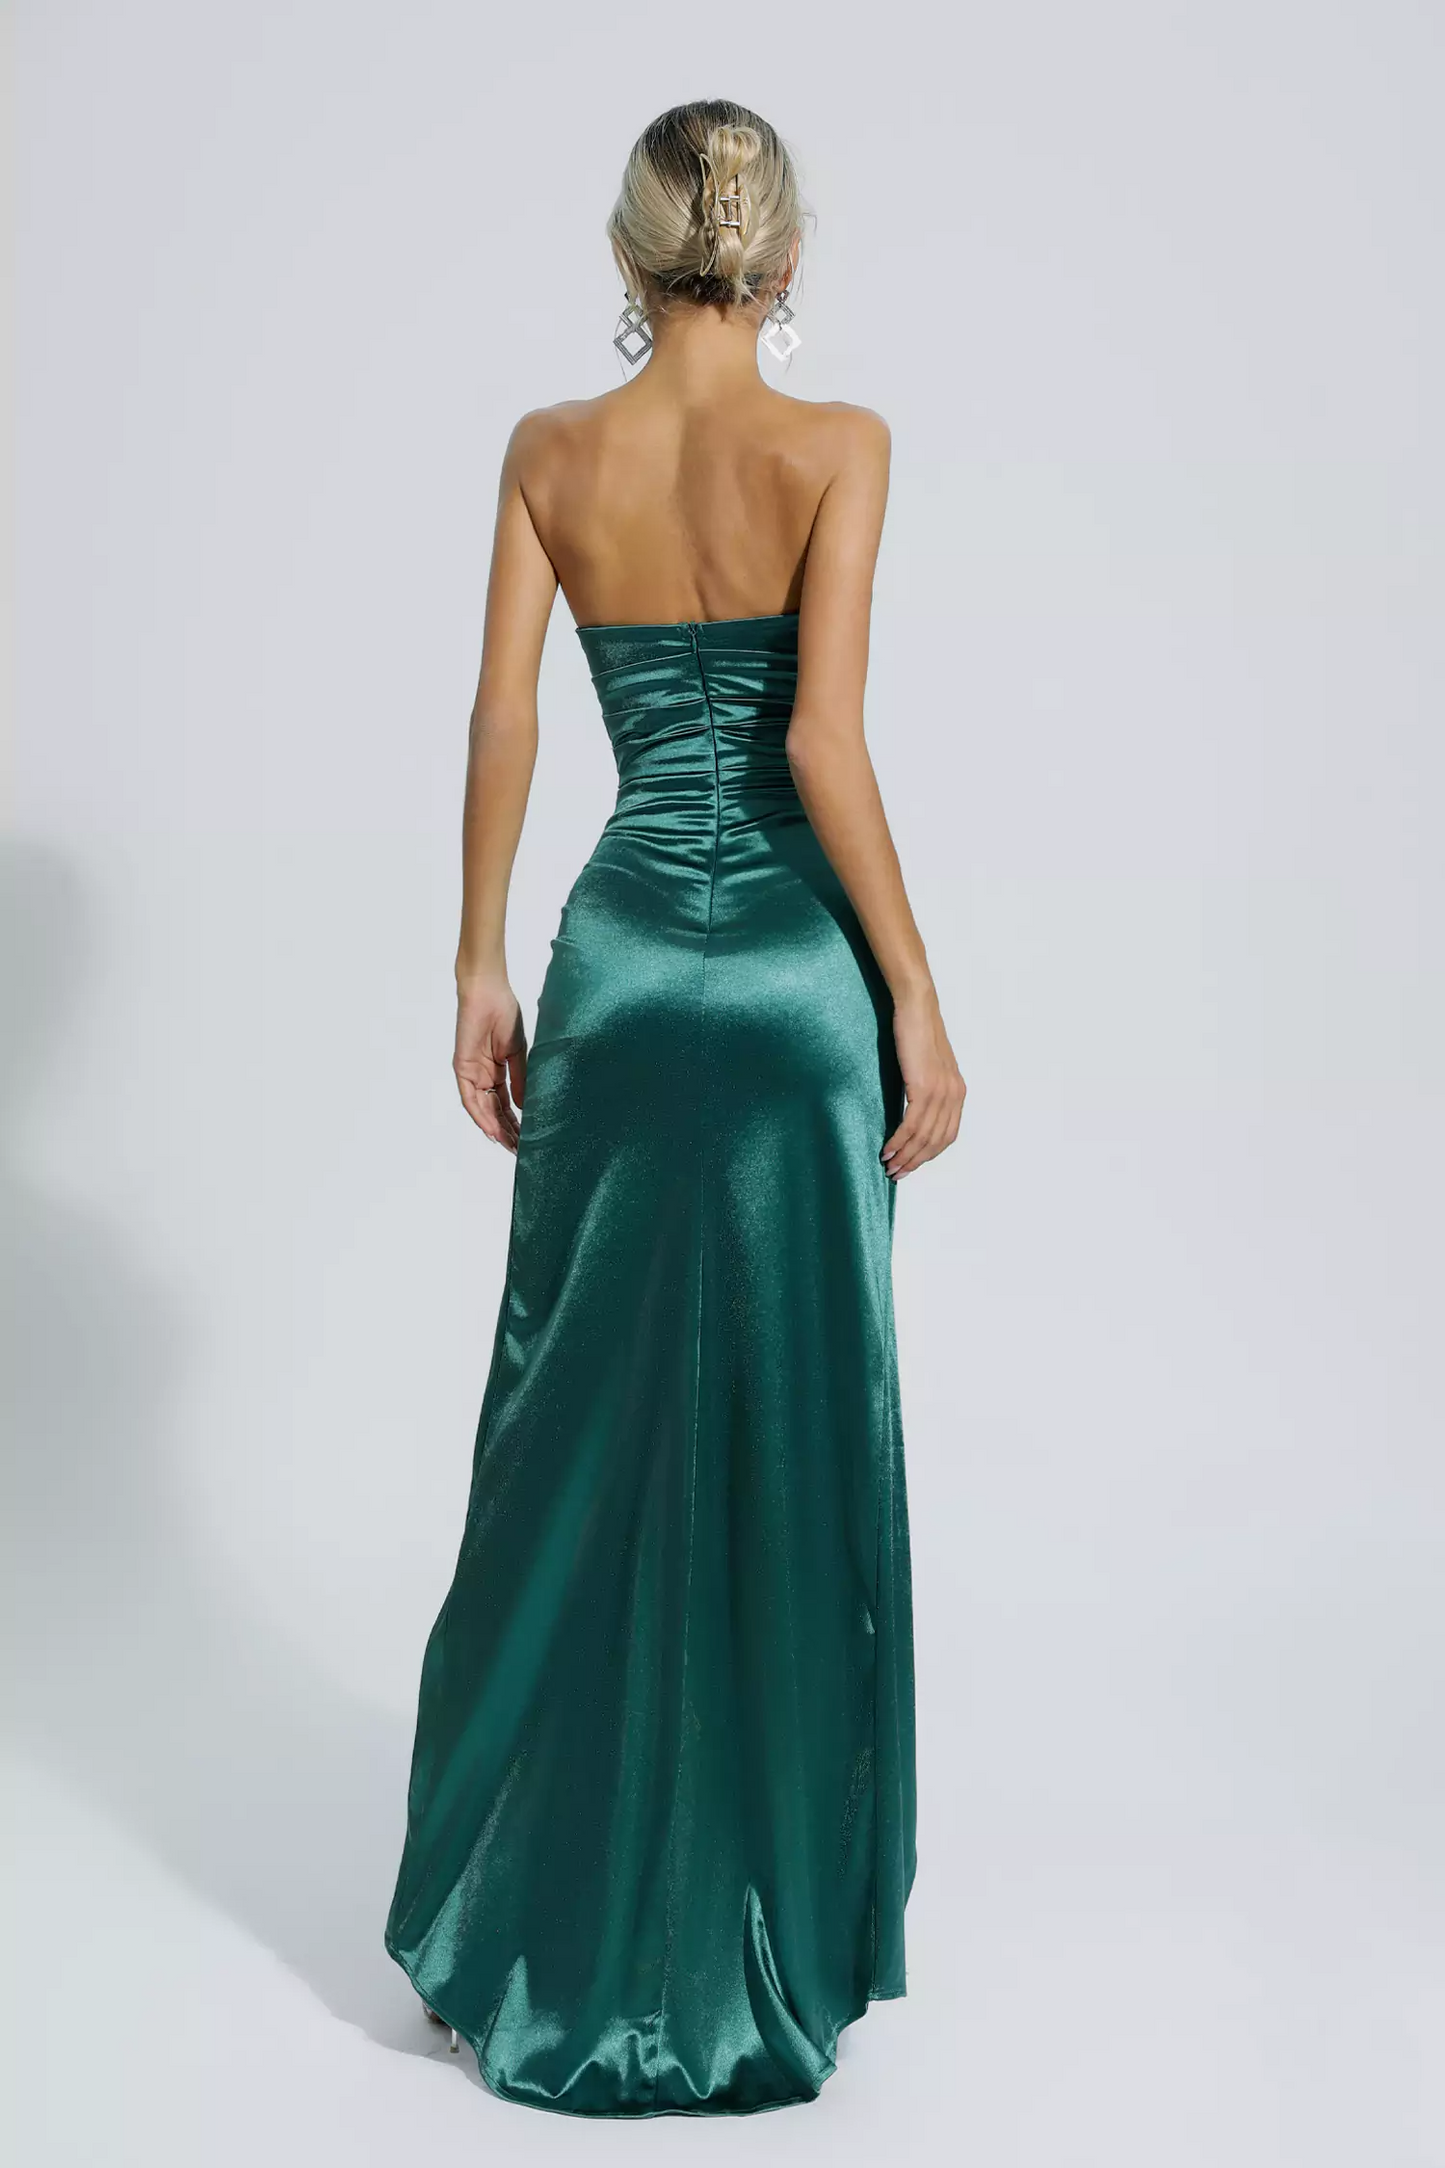 Derly Draped Wrap Strapless Maxi Dress In Green